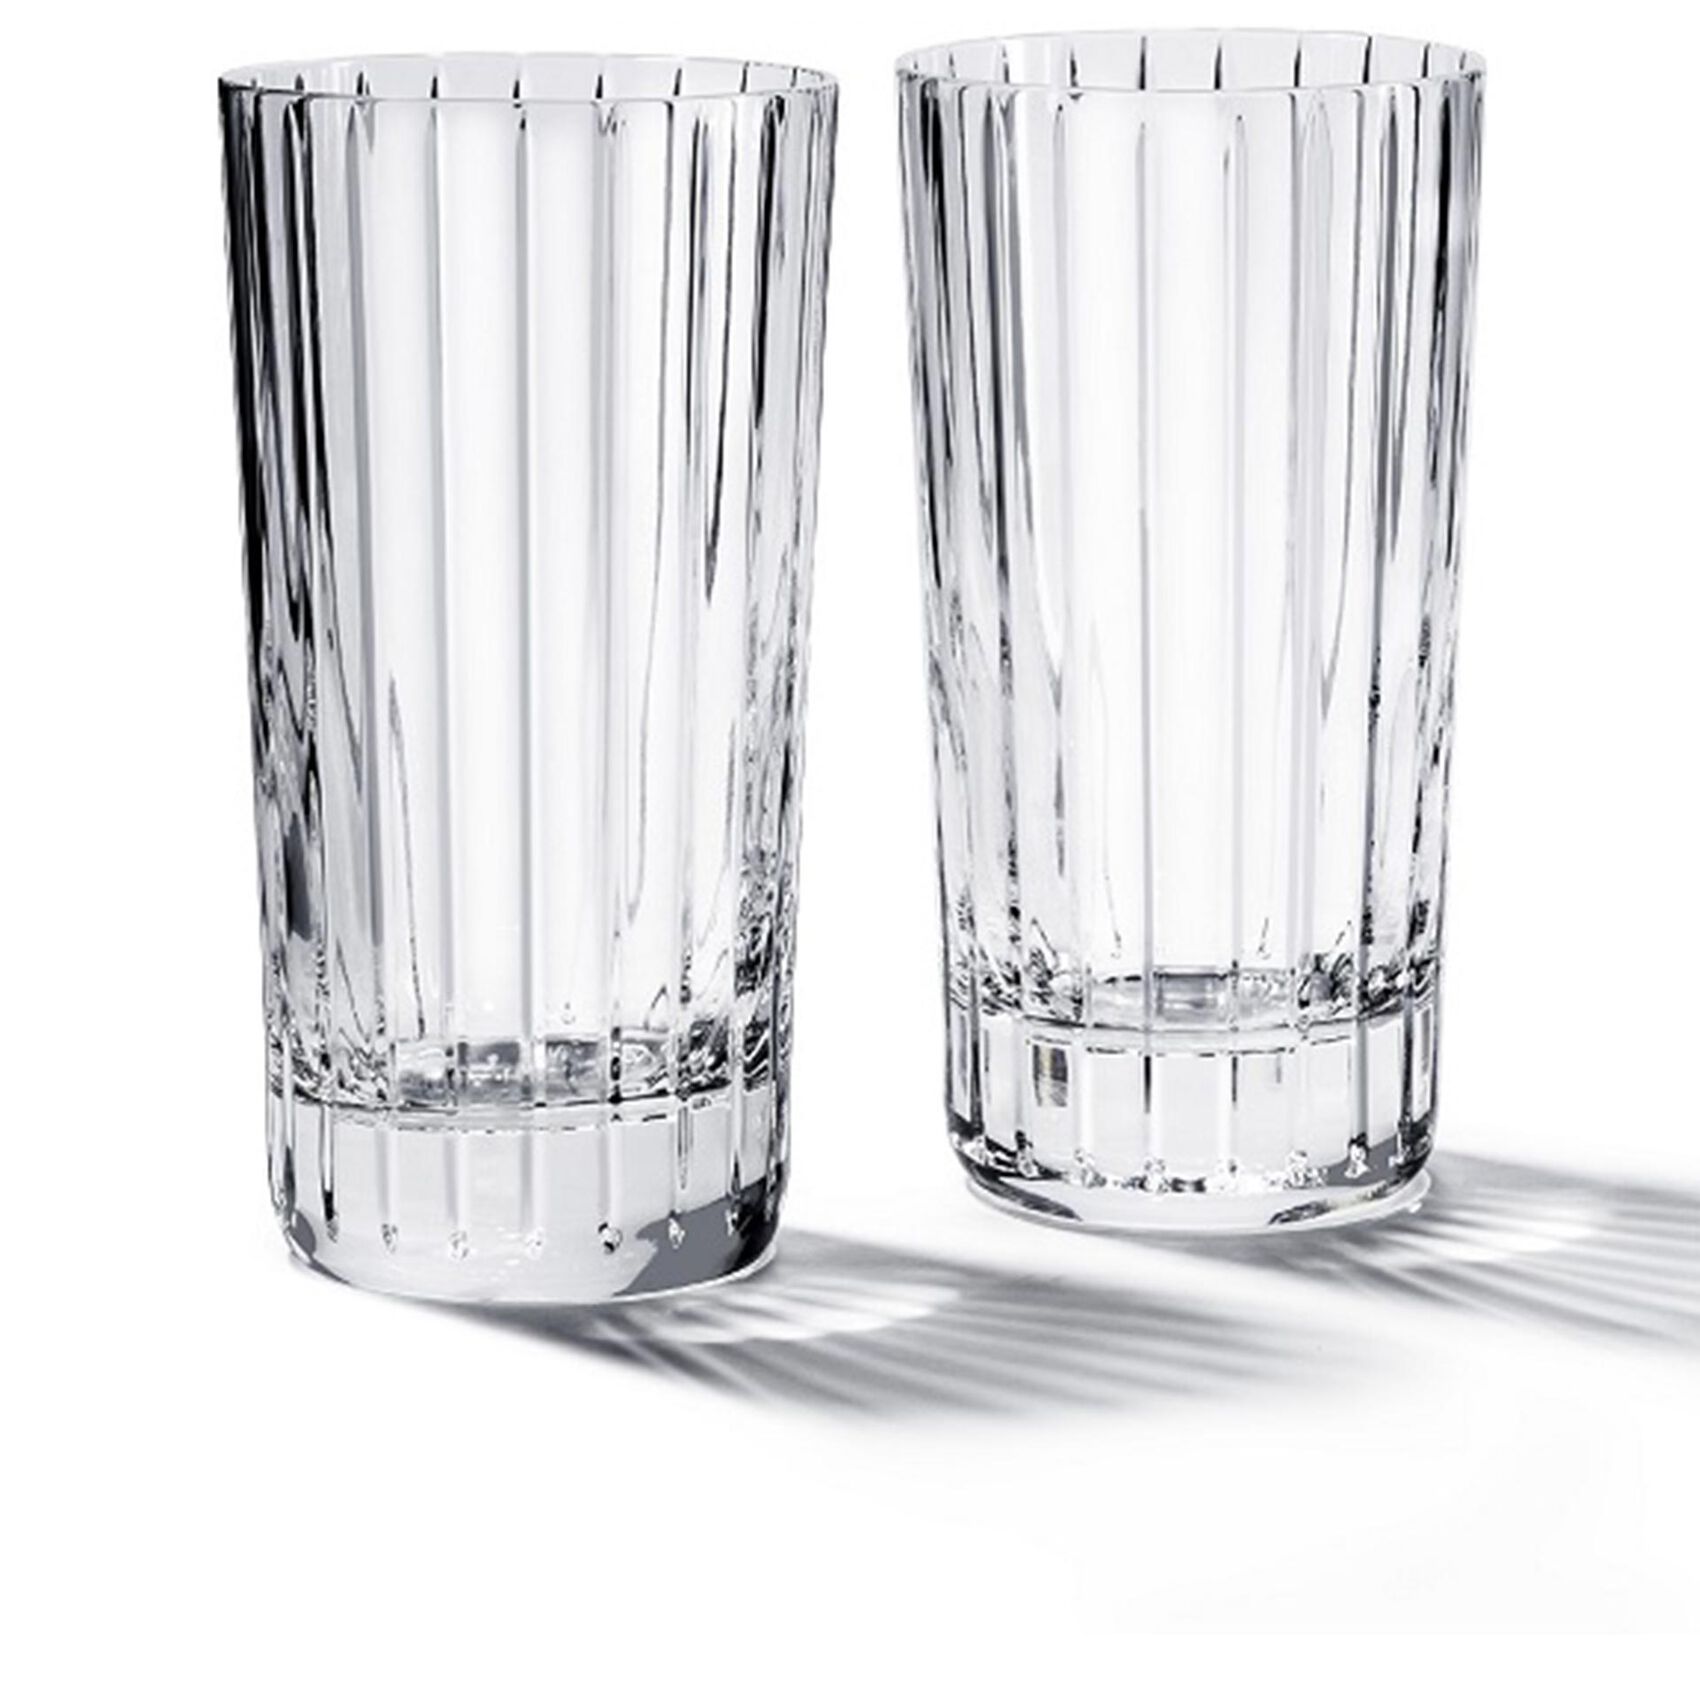 Collins Glass vs. Highball: Which Should I Buy?